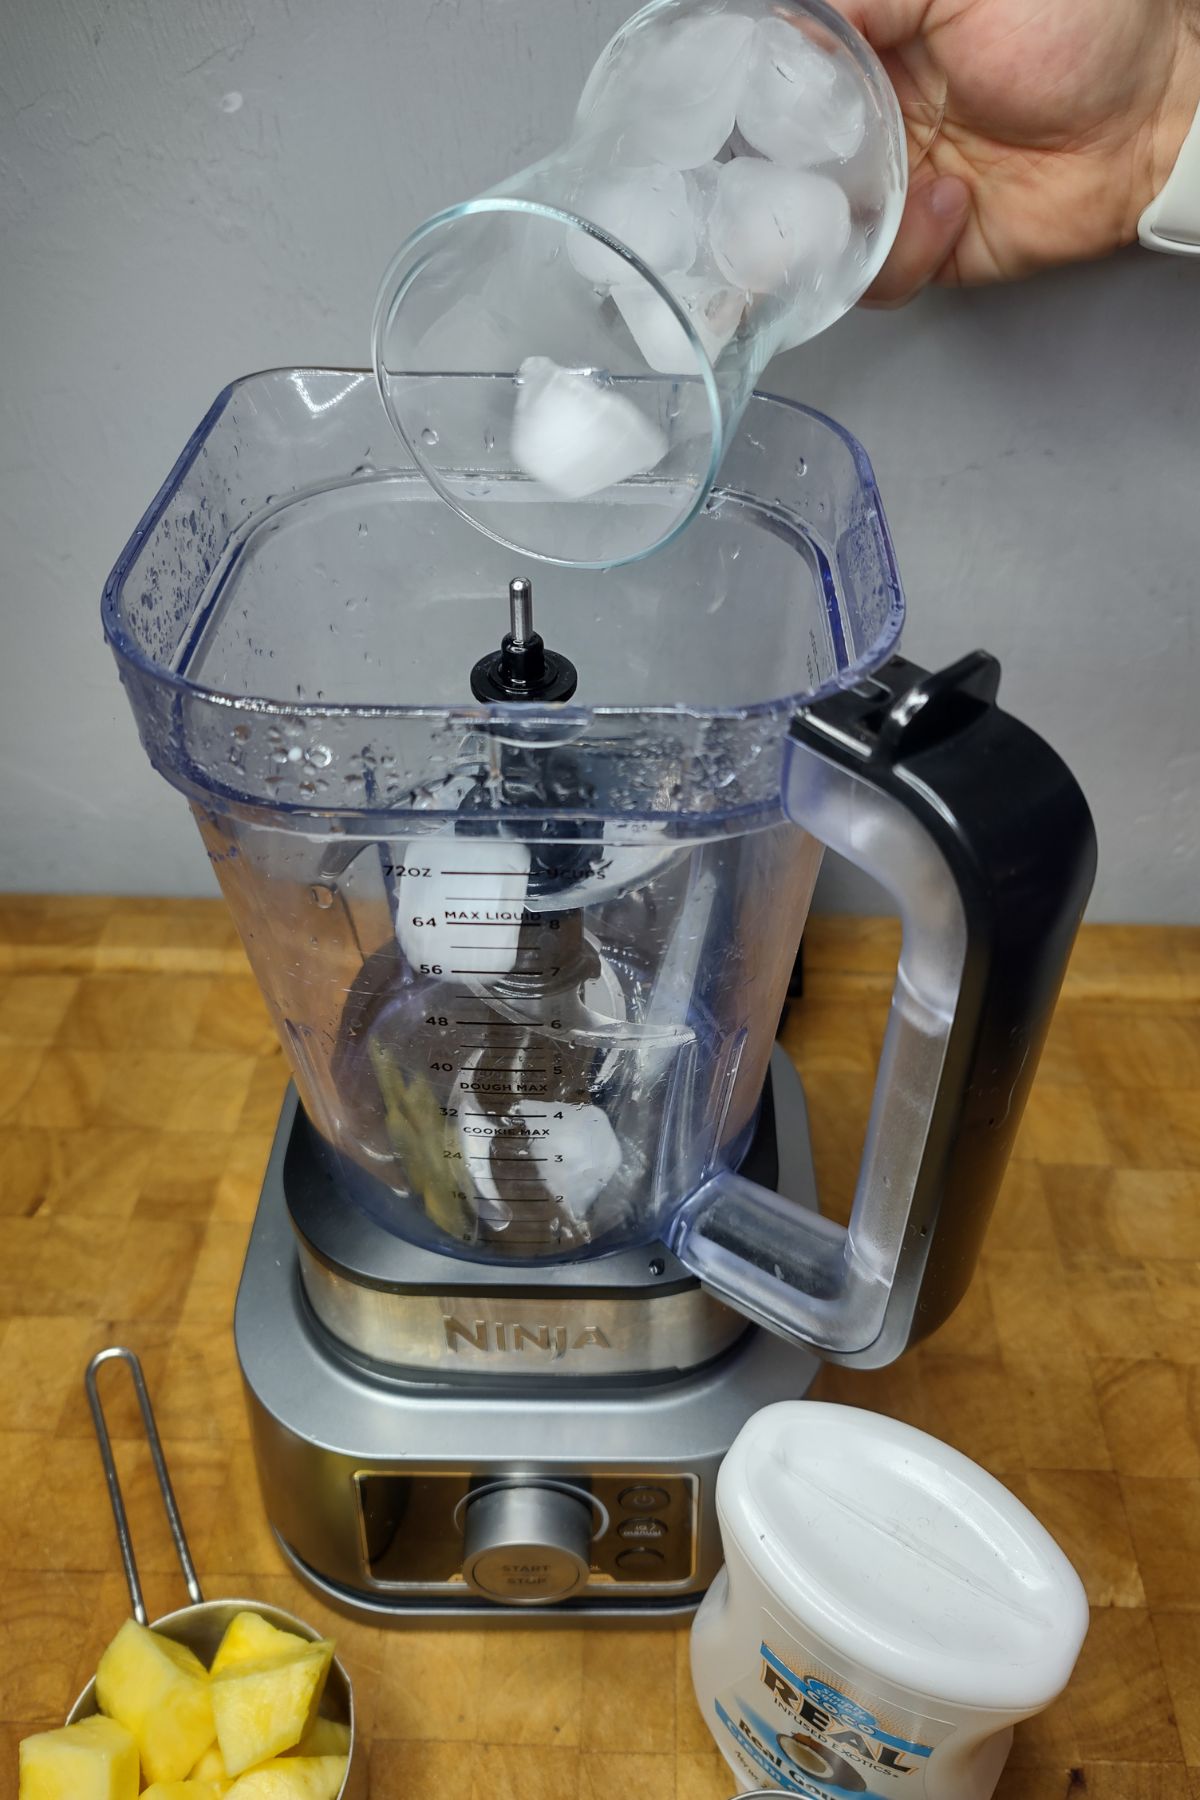 Dumping ice into a blender.